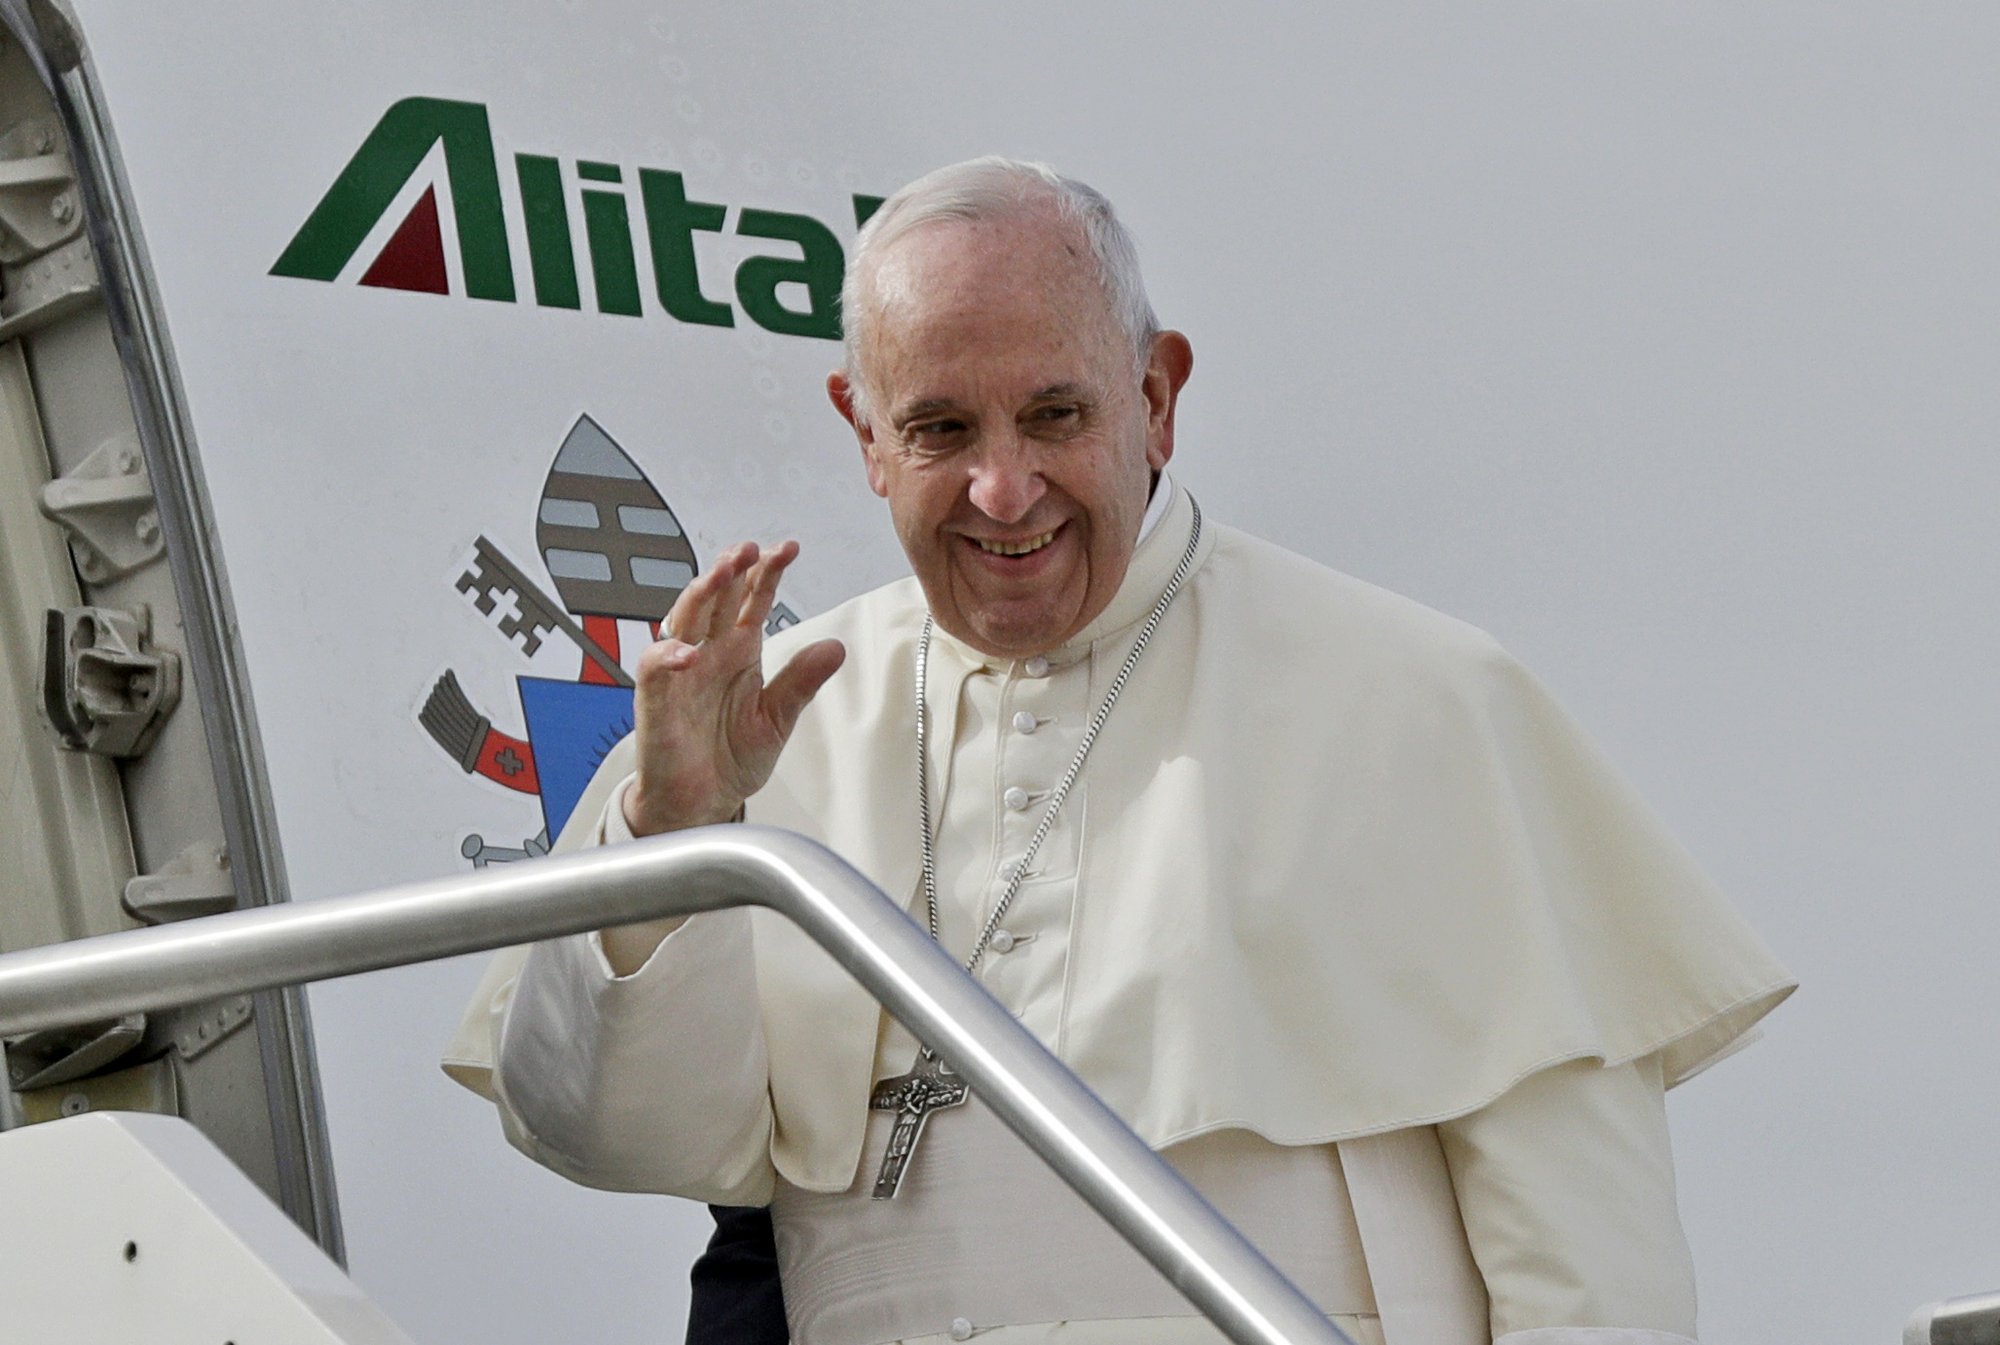 Pope Francis waves as he boards the airplane for Abu Dhabi, United Arab Emirates, at Rome's Fiumicino International airport, Sunday, Feb. 3, 2019. Francis made an urgent appeal for an end to the humanitarian crisis in Yemen on Sunday as he embarked on the first-ever papal trip to the Arabian Peninsula, where he is seeking to turn a page in Christian-Muslim relations while also ministering to a unique, thriving island of Catholicism. (AP Photo/Gregorio Borgia)